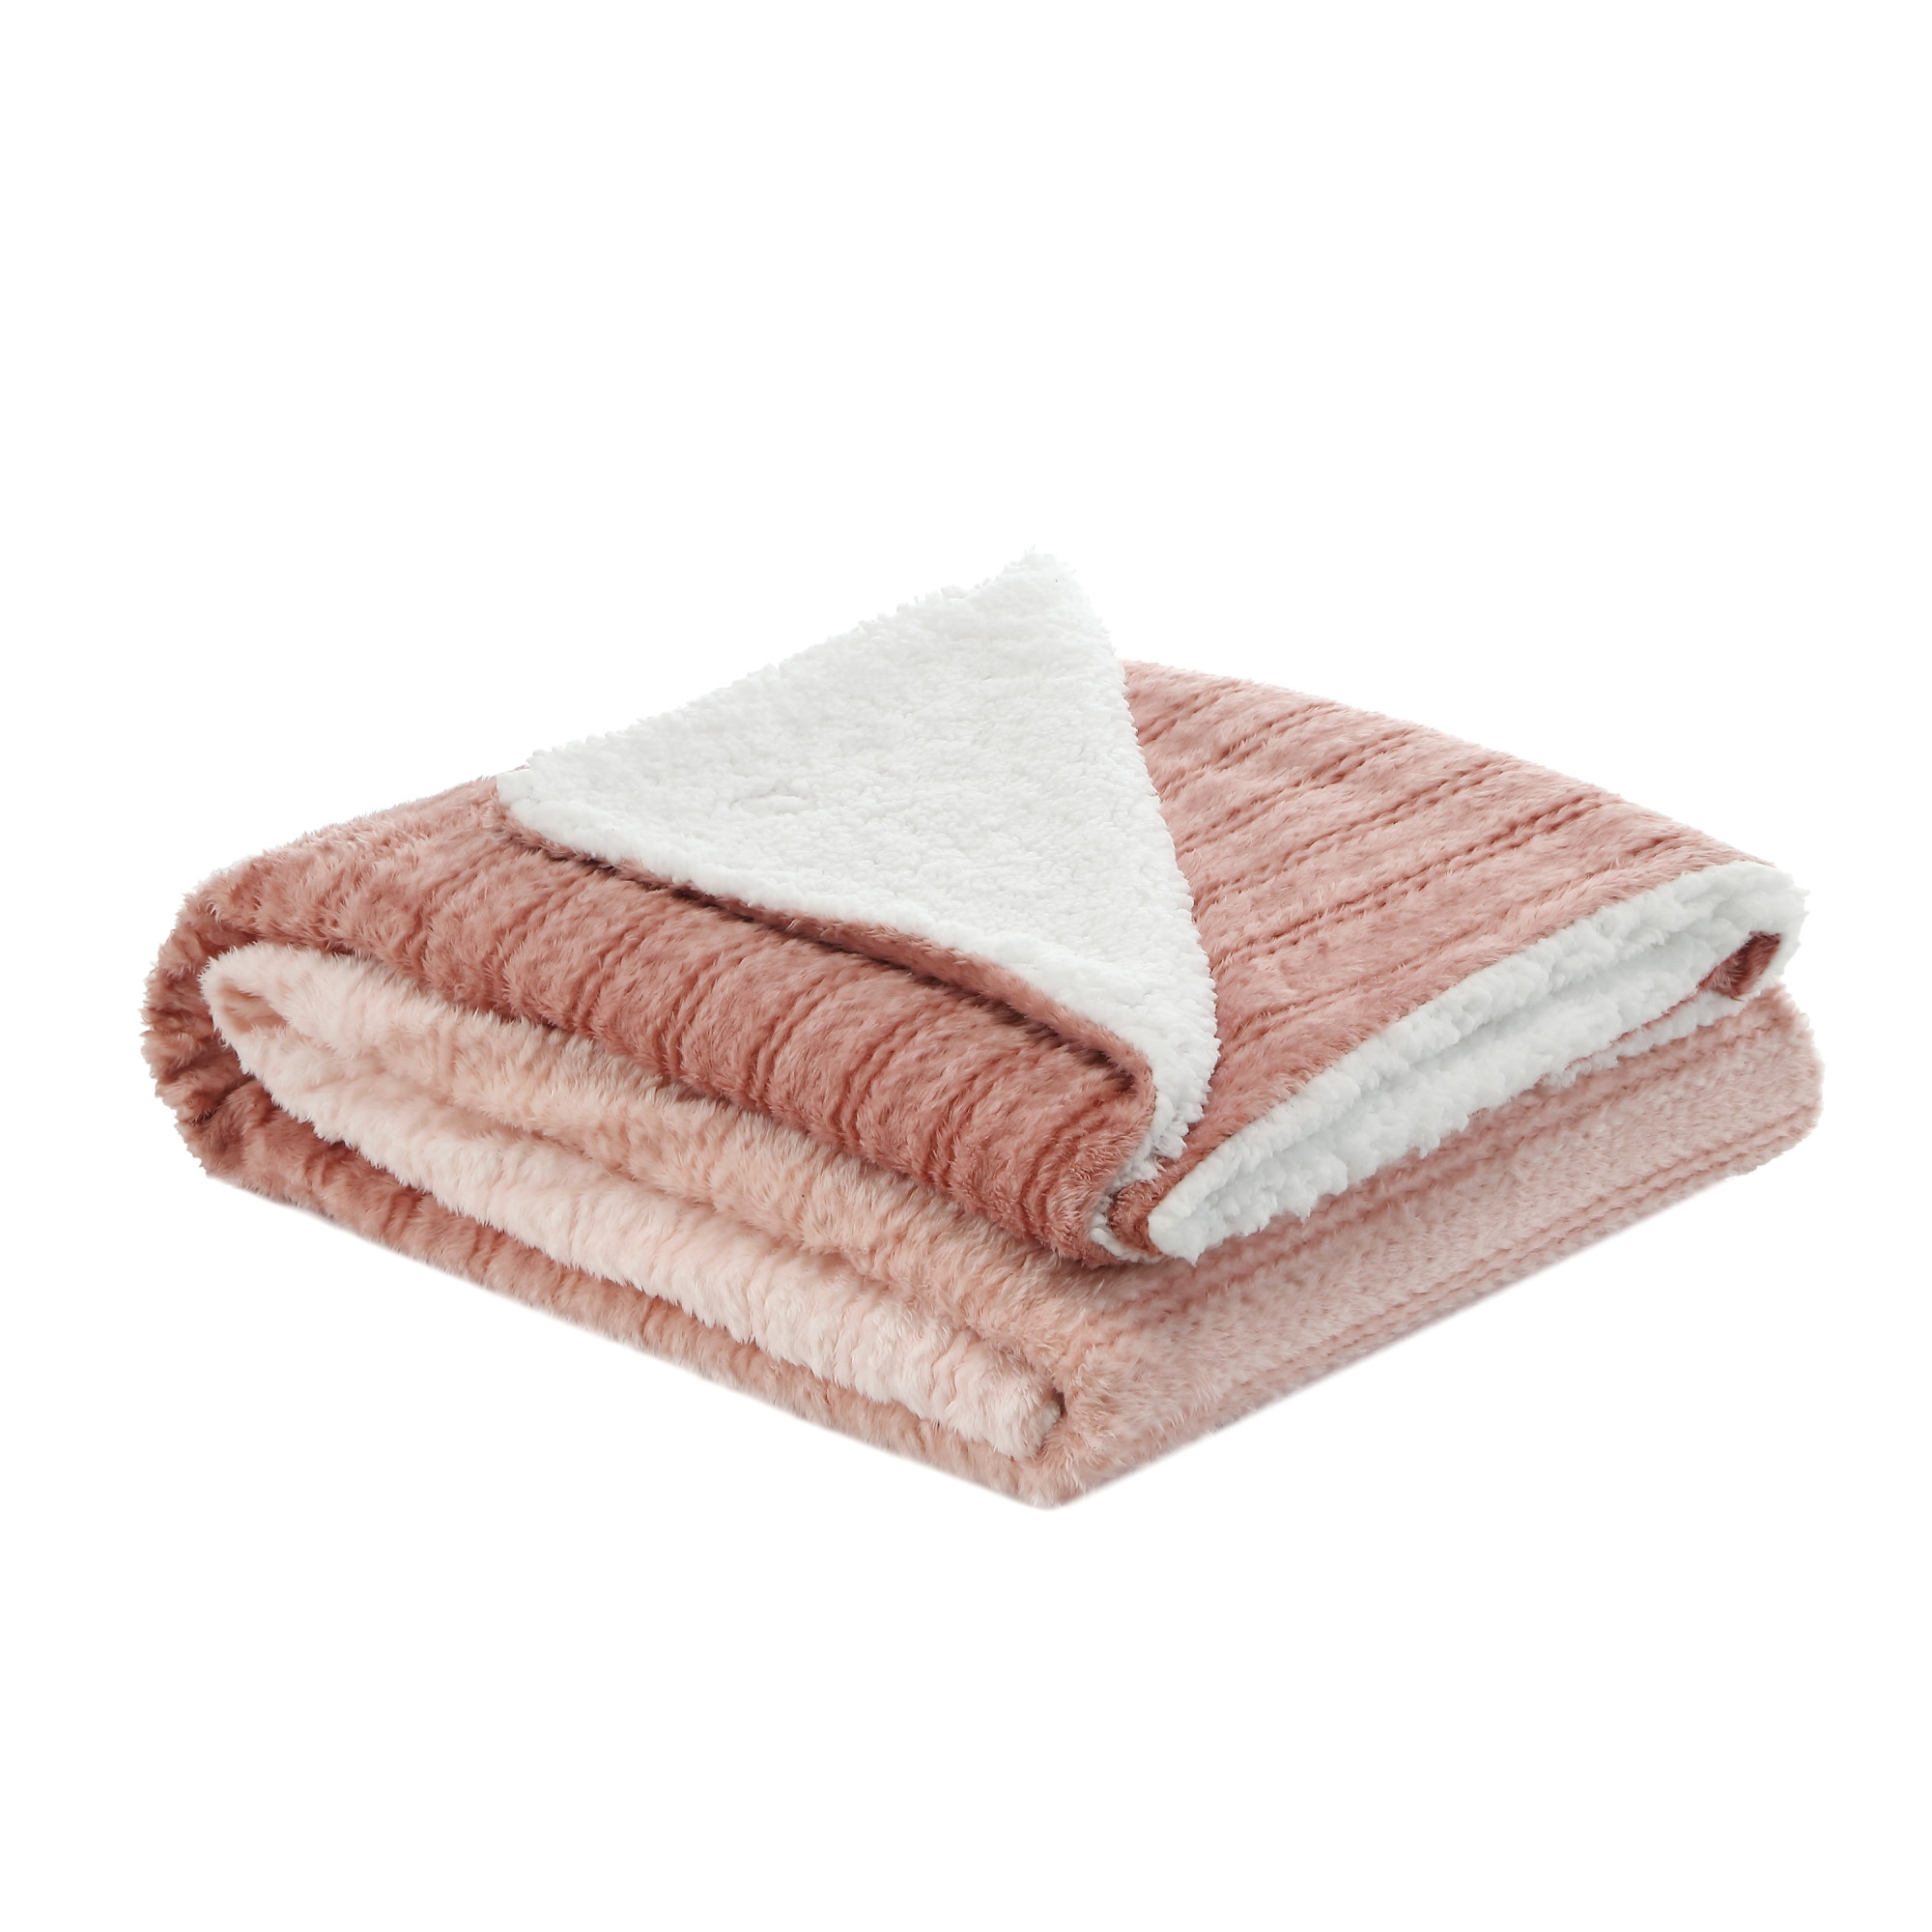 Blush Knitted PolYester Solid Color Plush Throw Blanket-531227-1